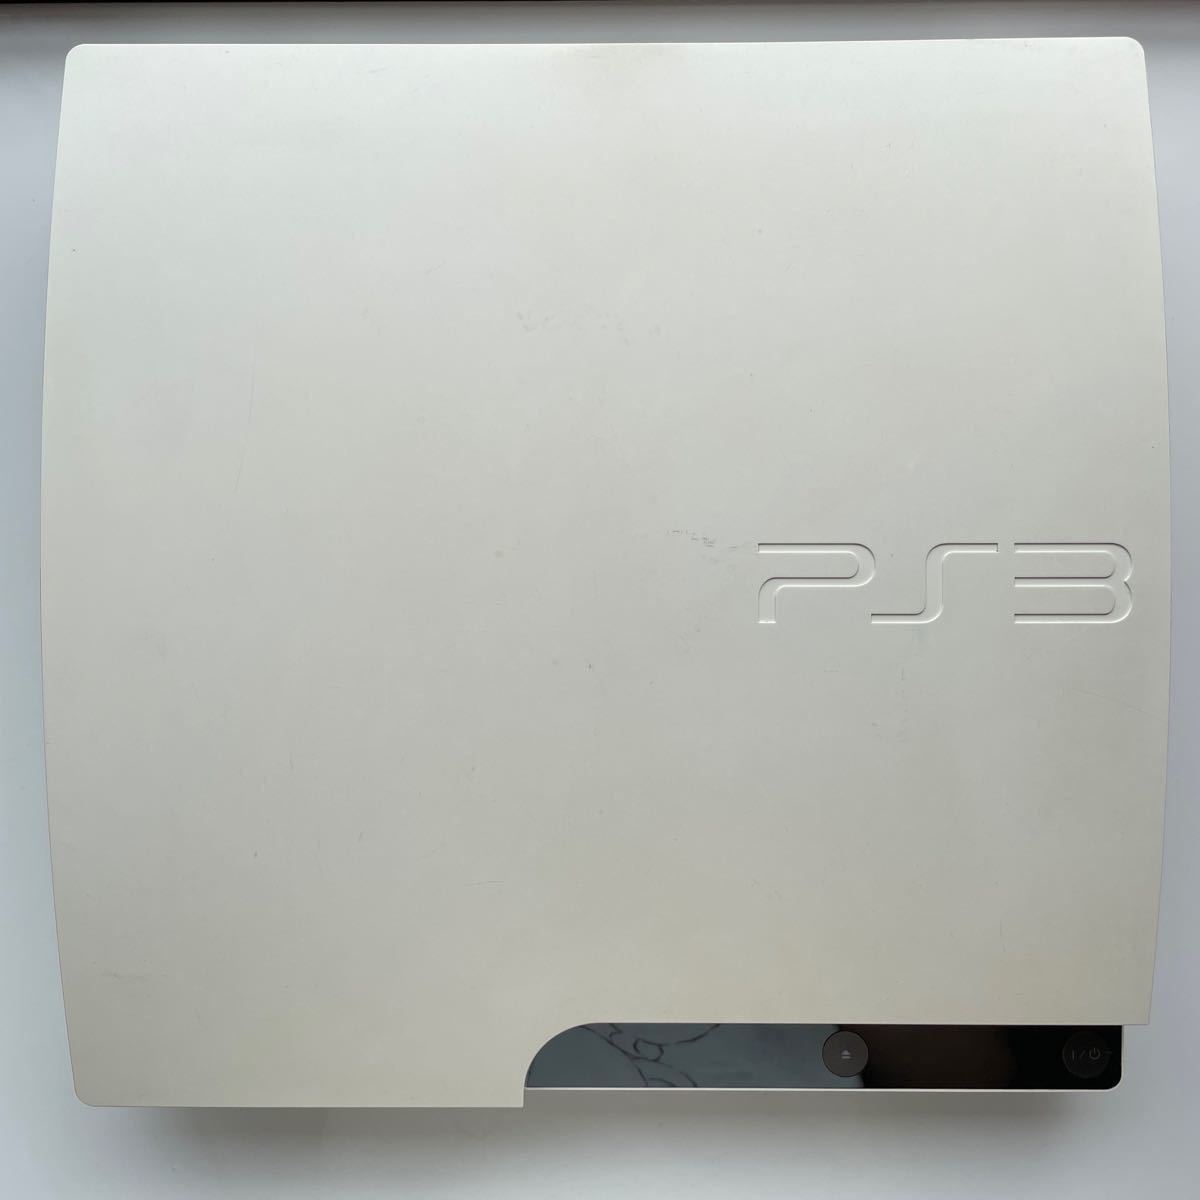 PlayStation3 ホワイト CECH-2500A コントローラー2個 ソフト5本付き